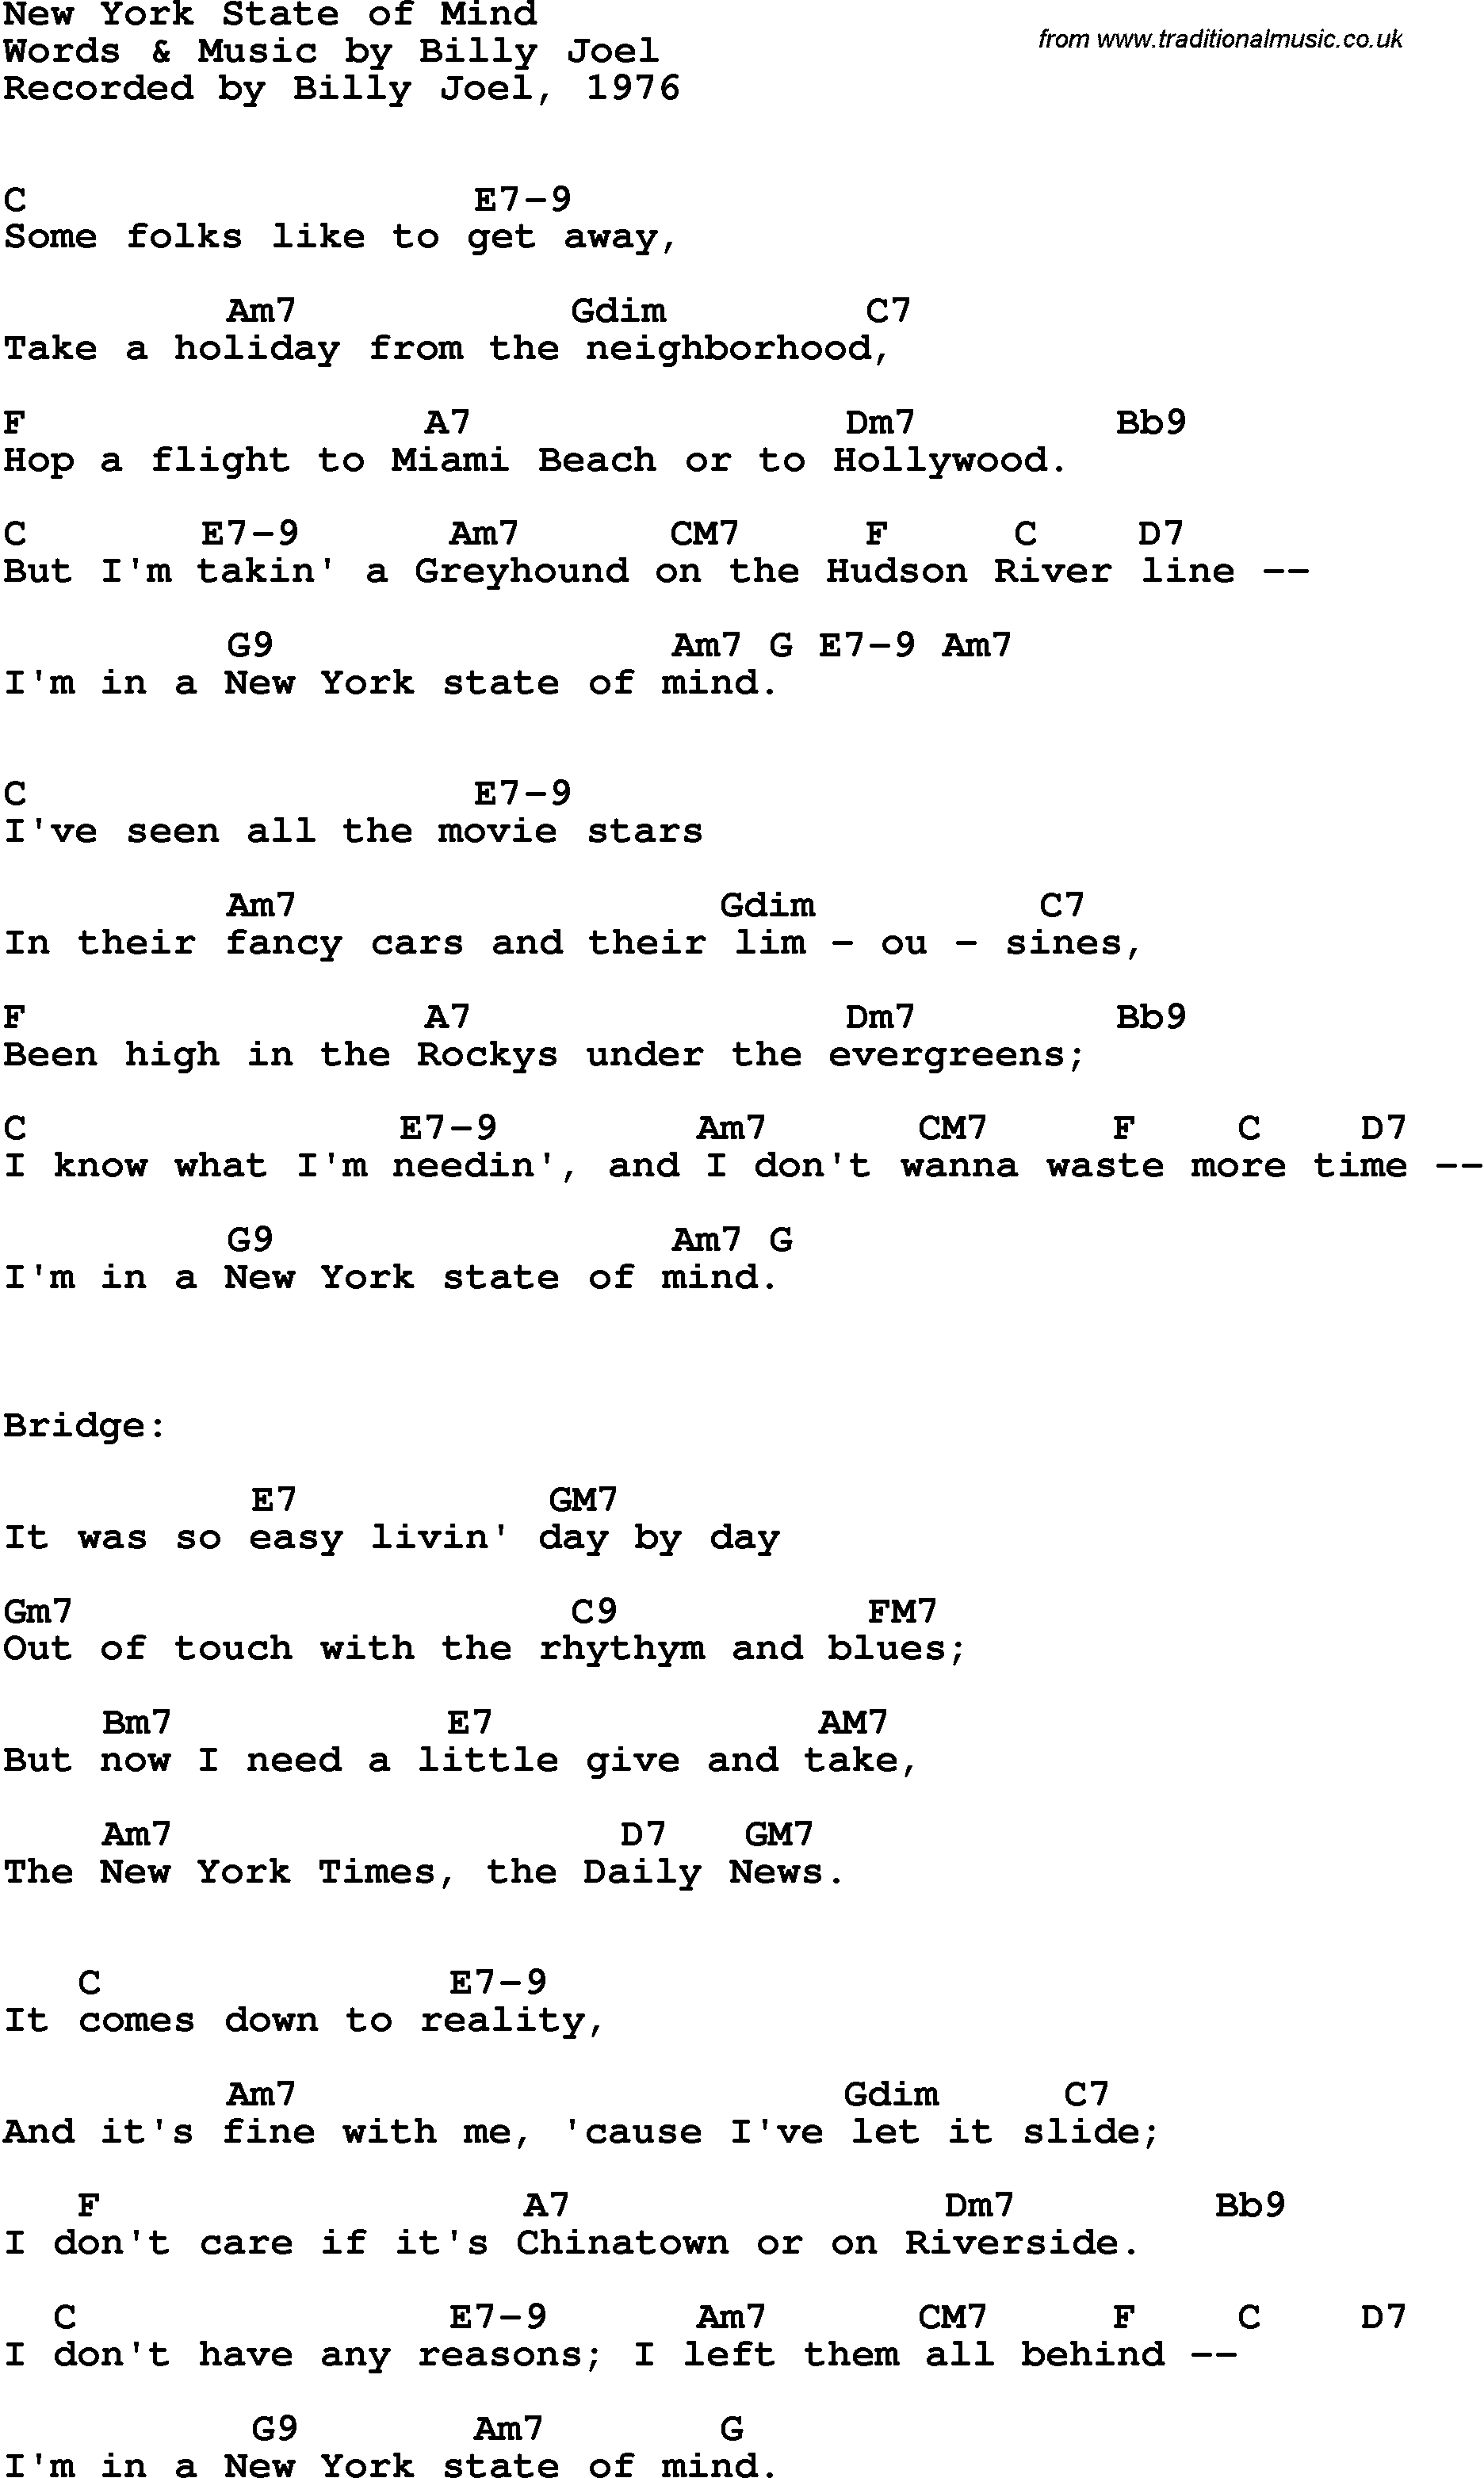 song lyrics with guitar chords for new york state of mind